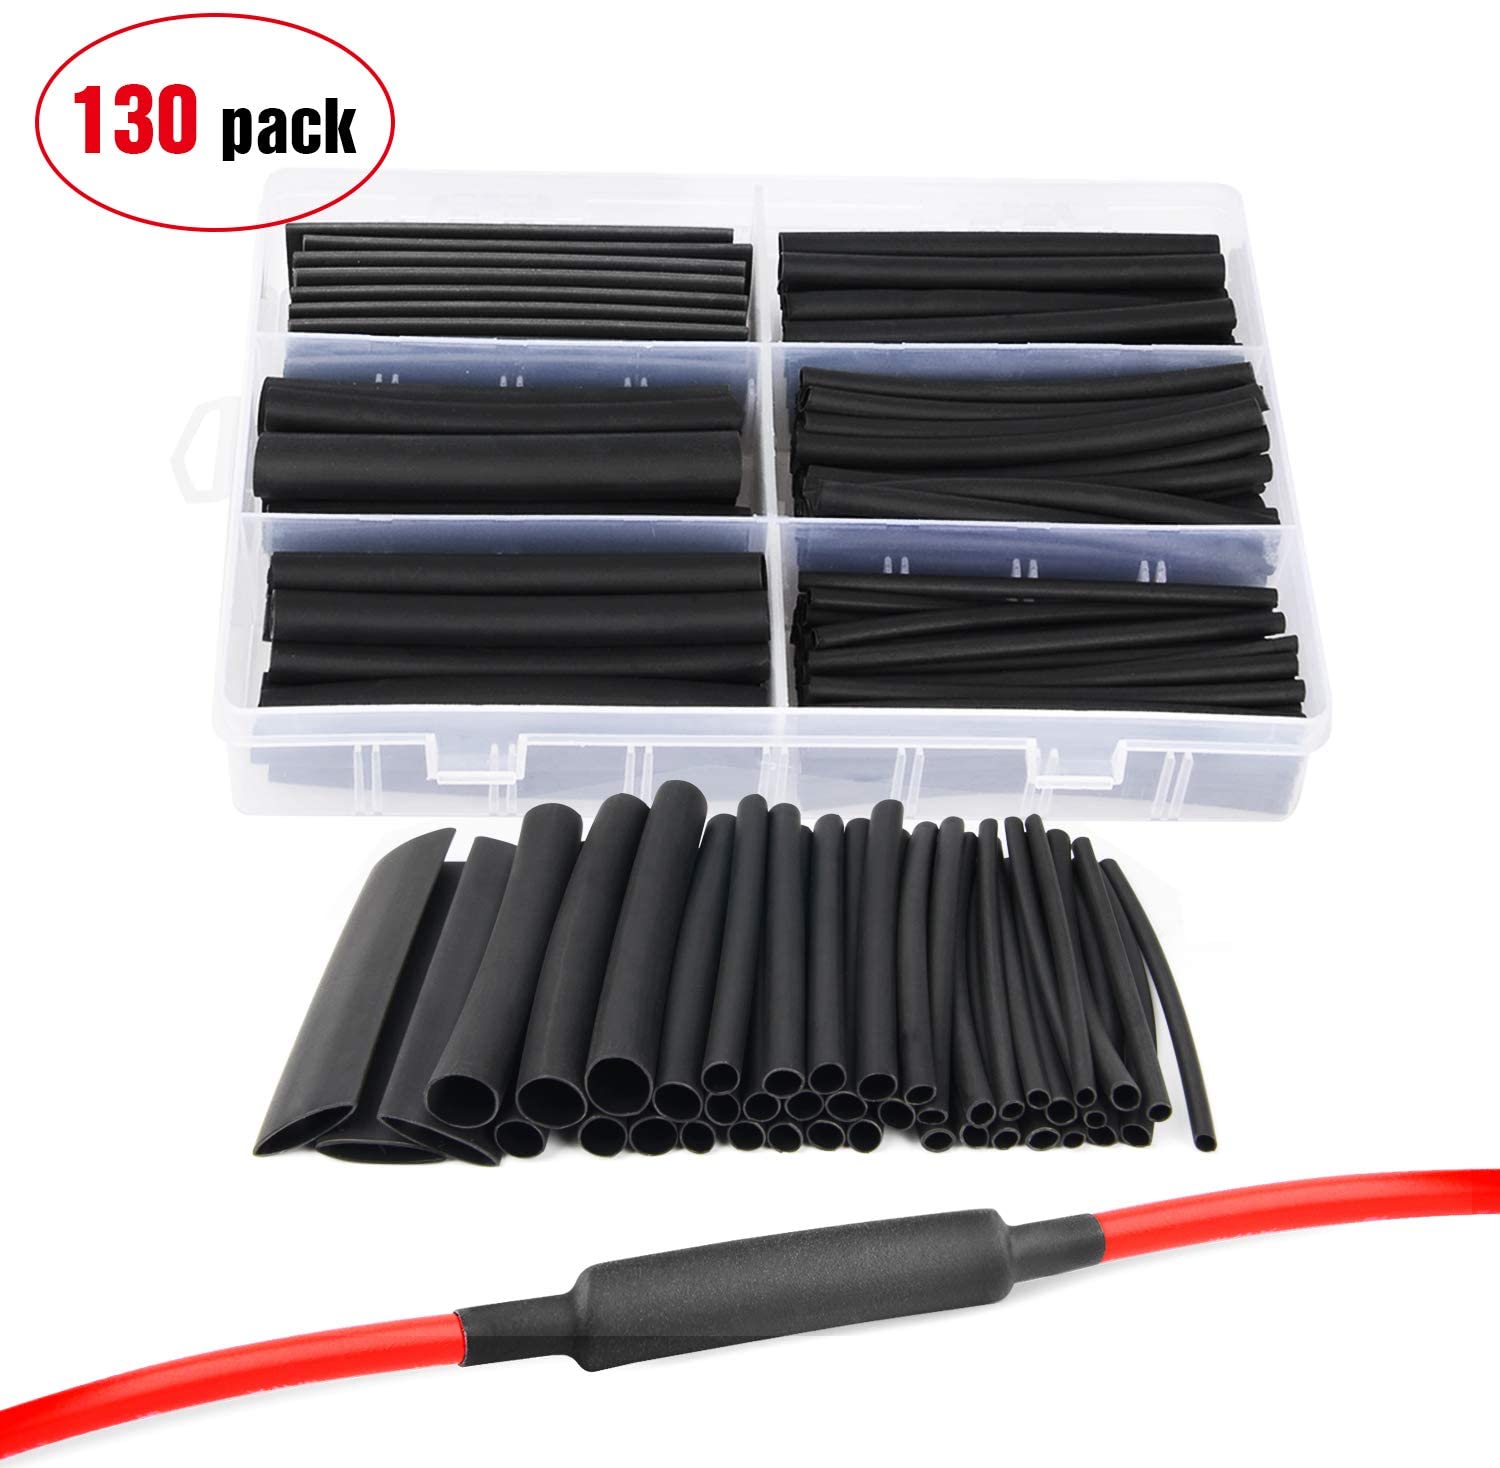 Nilight 130 Pcs 3:1 Heat Shrink Tubing Kit Dual Wall Adhesive Sleeve Tube Electrical Wire Cable Wrap Tube Assortment with Storage Case for DIY(6 Sizes, Black), 2 Years Warranty (50089R)